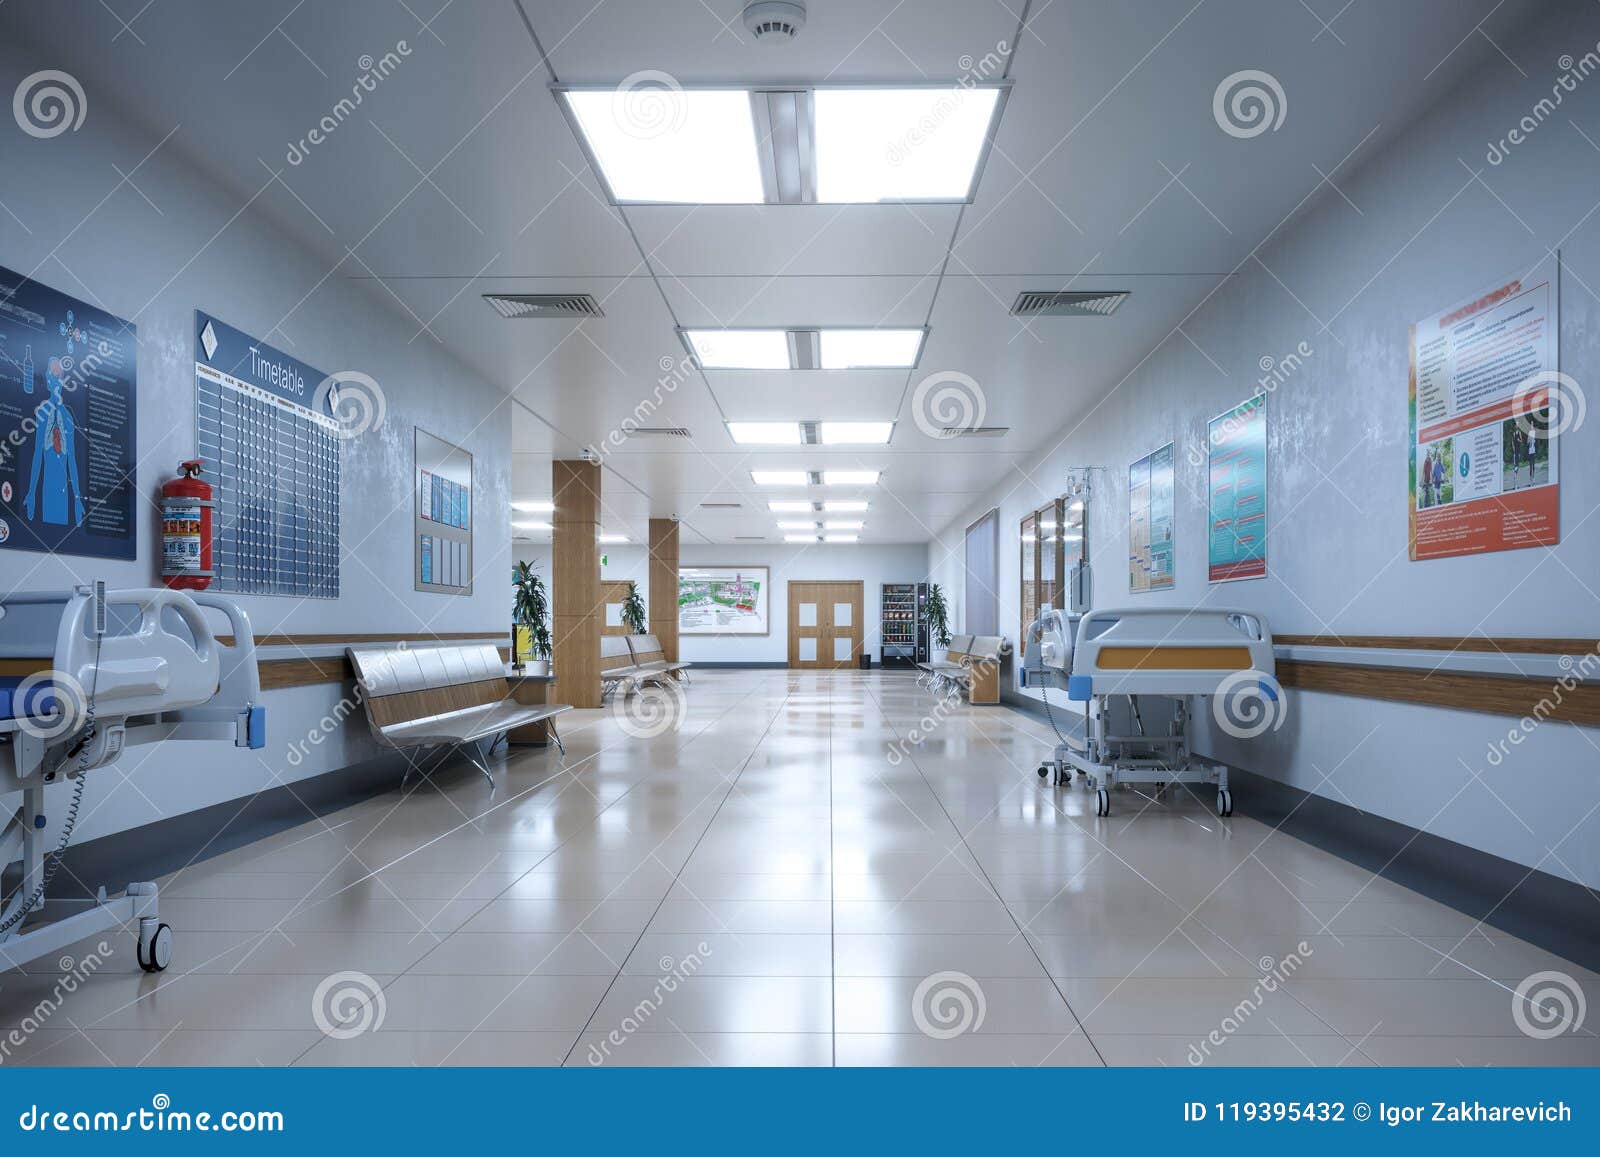 hallway the emergency room and outpatient hospital